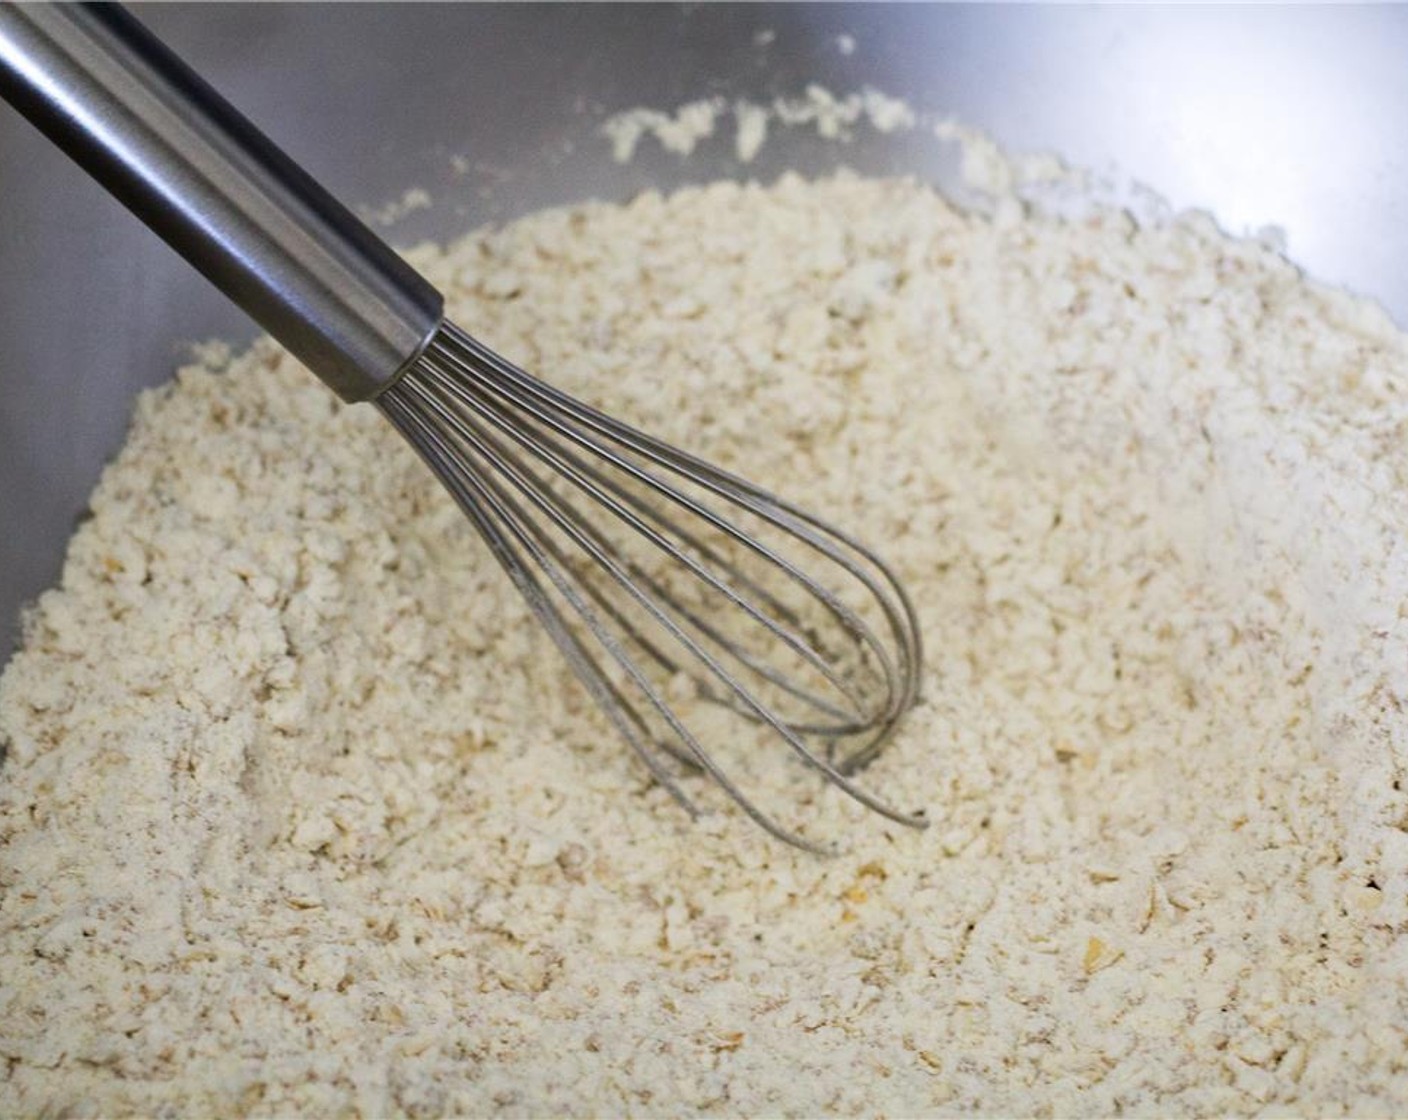 step 3 In a large bowl, add the All-Purpose Flour (2 cups), Quick Cooking Oats (1 cup), Brown Sugar (1/3 cup), Baking Powder (1 tsp), Baking Soda (1 tsp) and Salt (1/4 tsp), and whisk together.